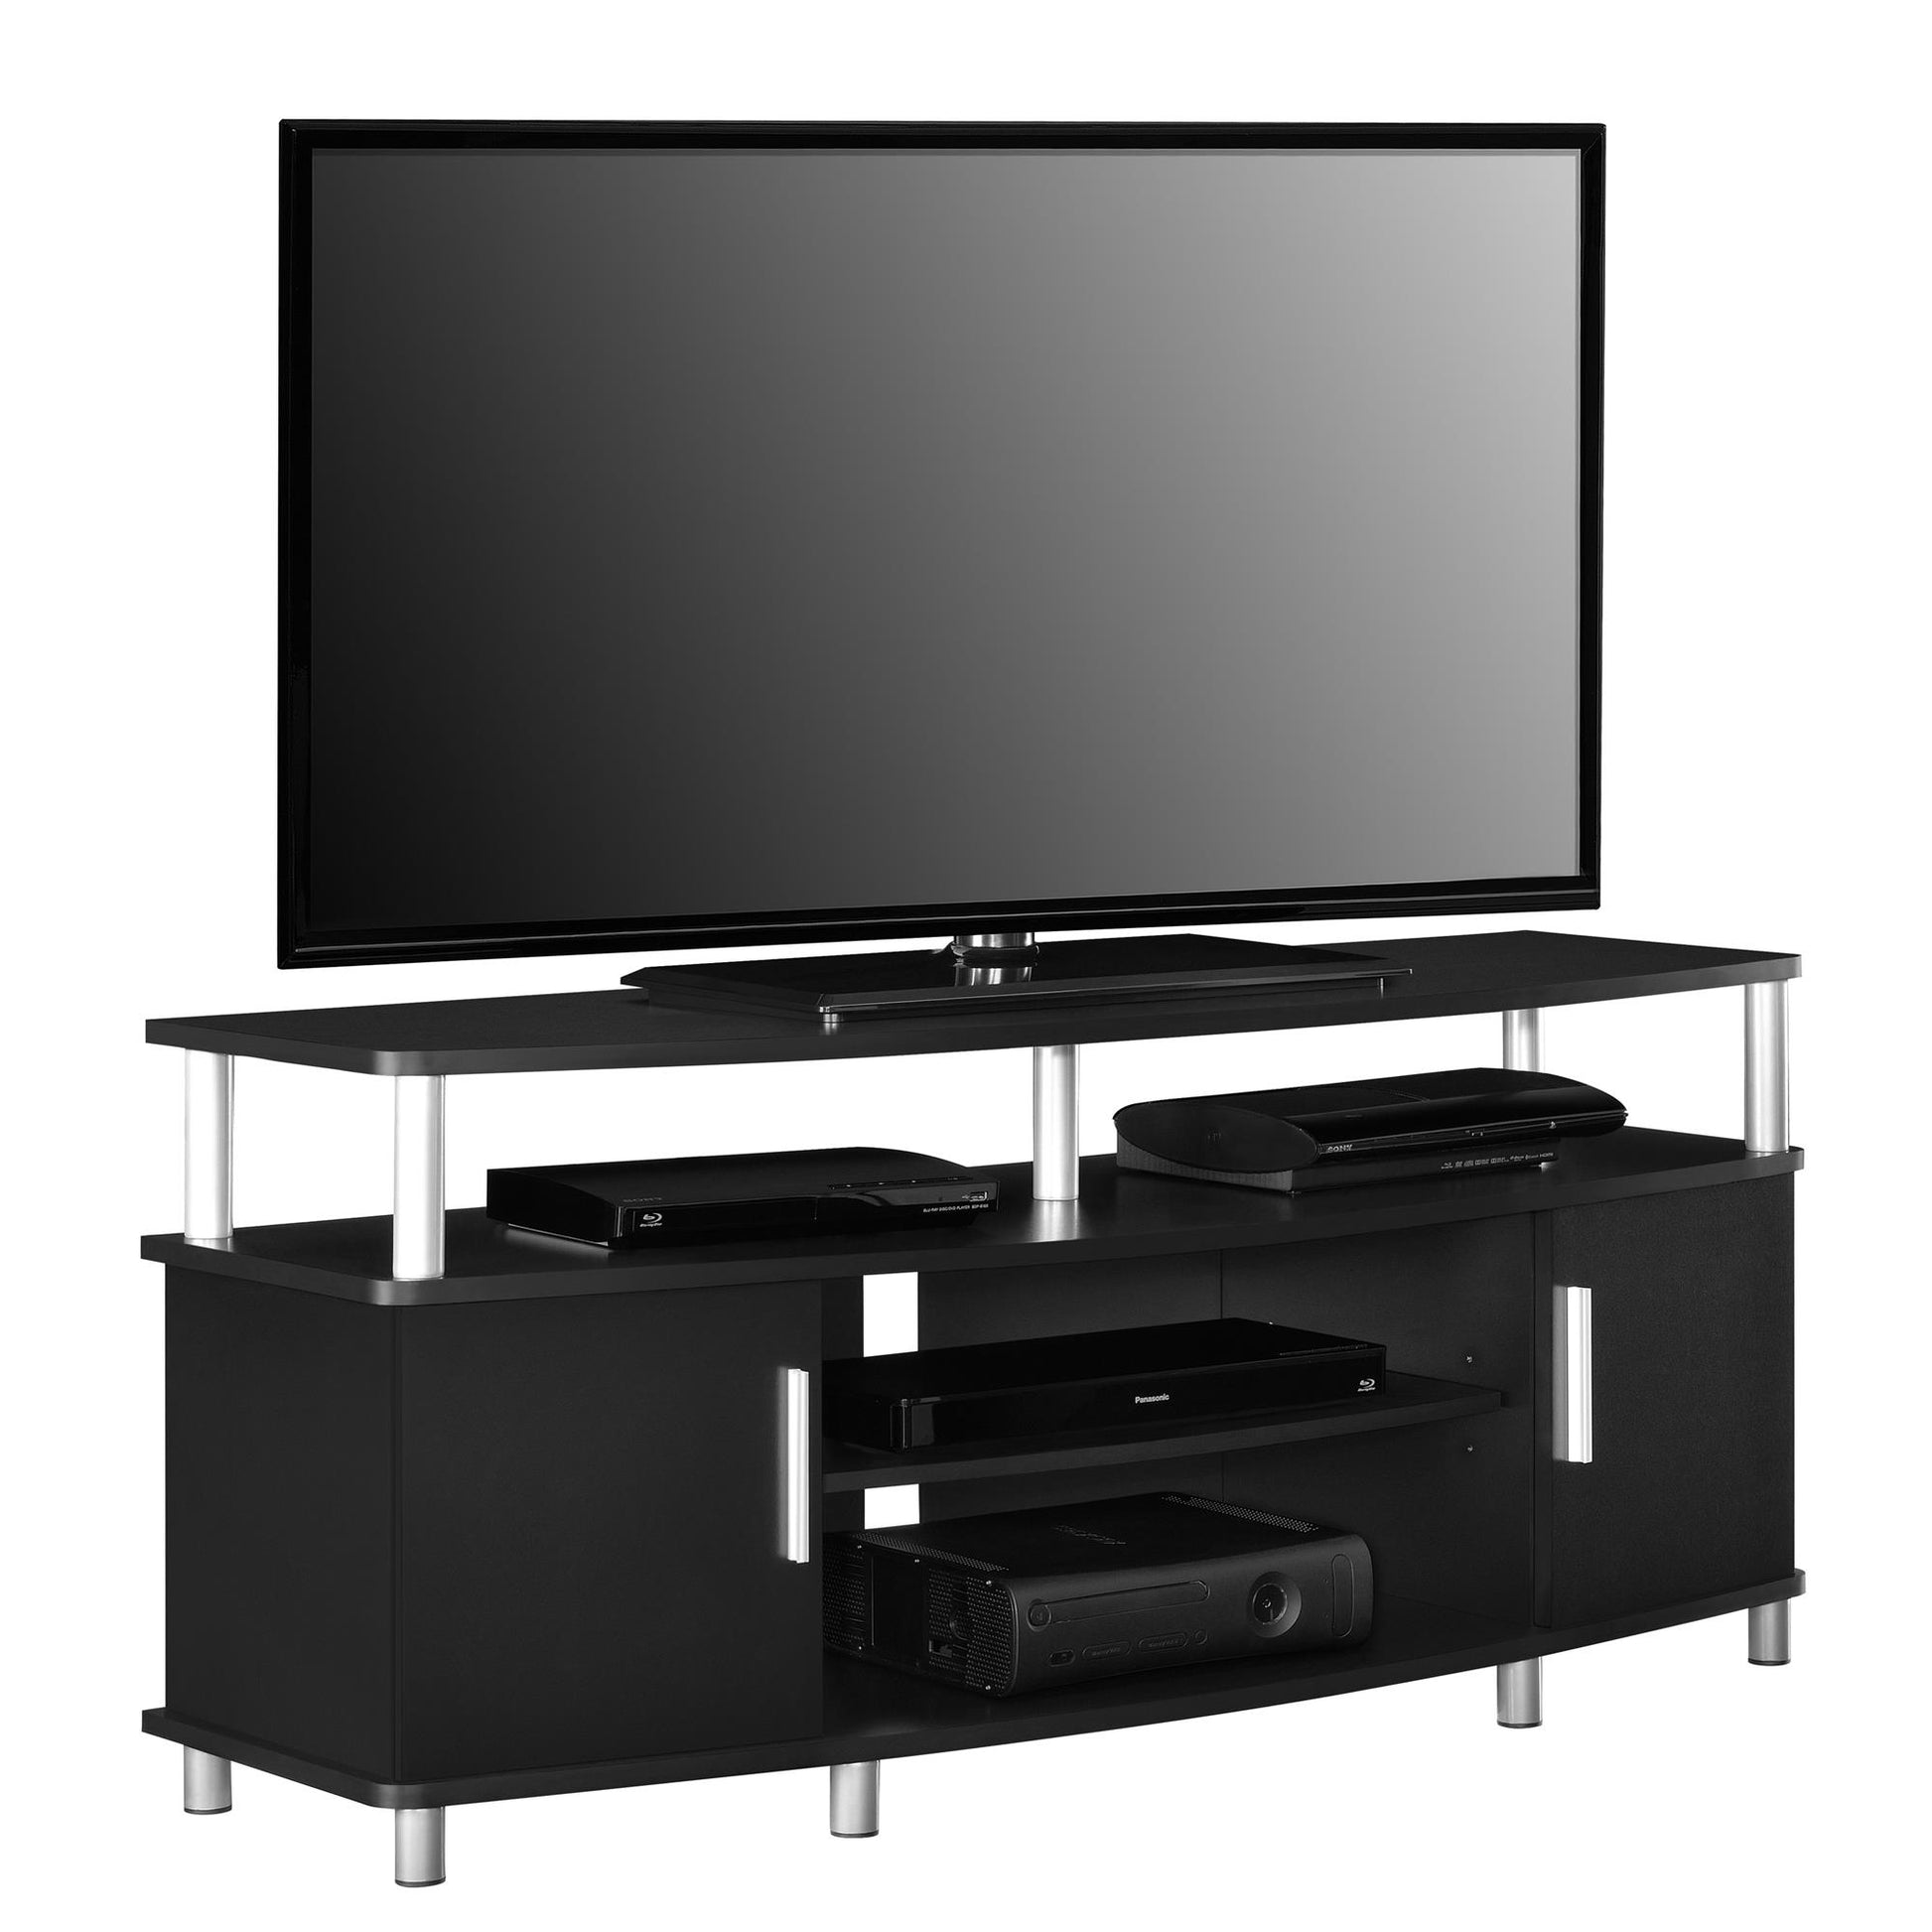 Carson Contemporary TV Stand for TVs up to 50 Inch - Black